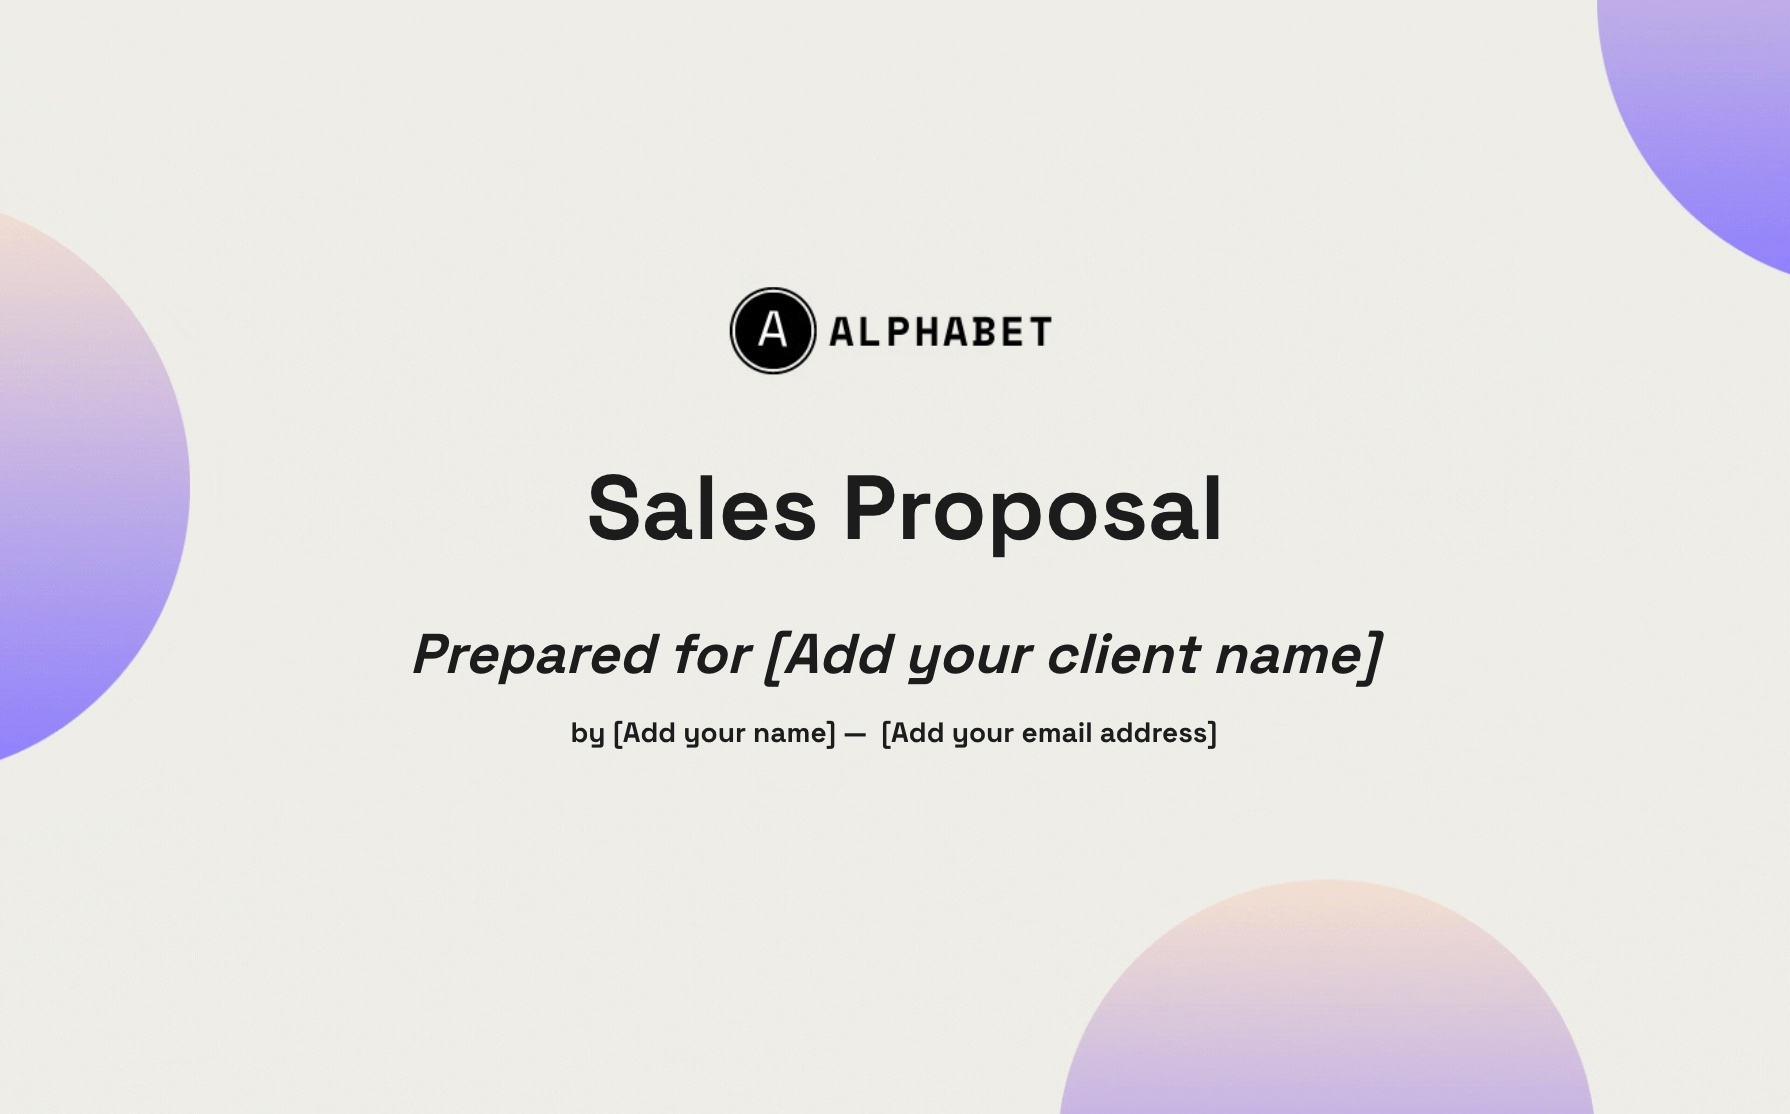 Sales Proposal Template